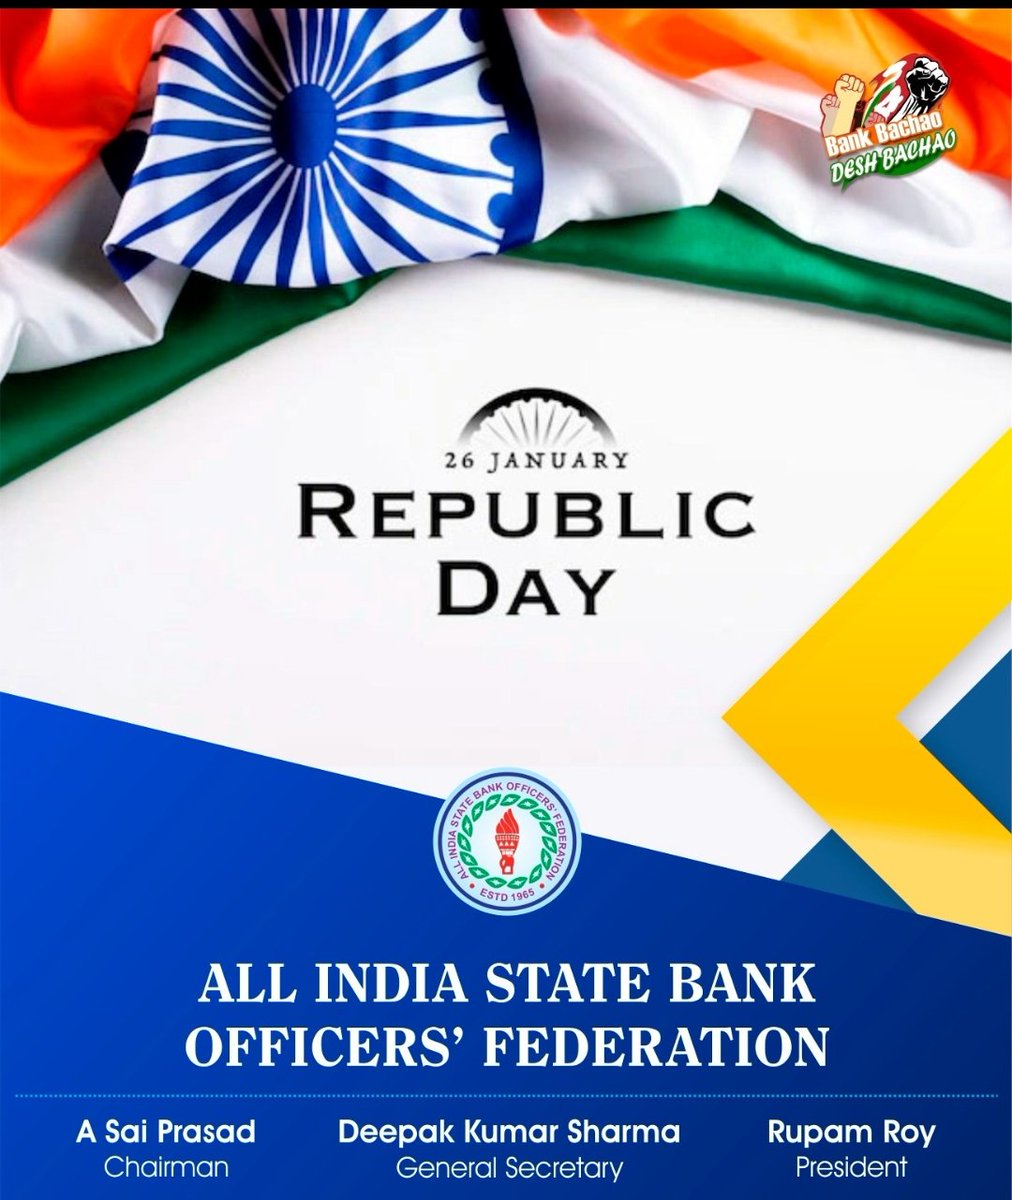 🇮🇳 Happy 75th Republic Day! On this auspicious day, let's celebrate India's unity and democratic spirit. As members of the AISBOF, we pledge to uphold our nation's values - Nation first, organization second, individuals last. Jai Hind! 🌟 #RepublicDay #AISBOF